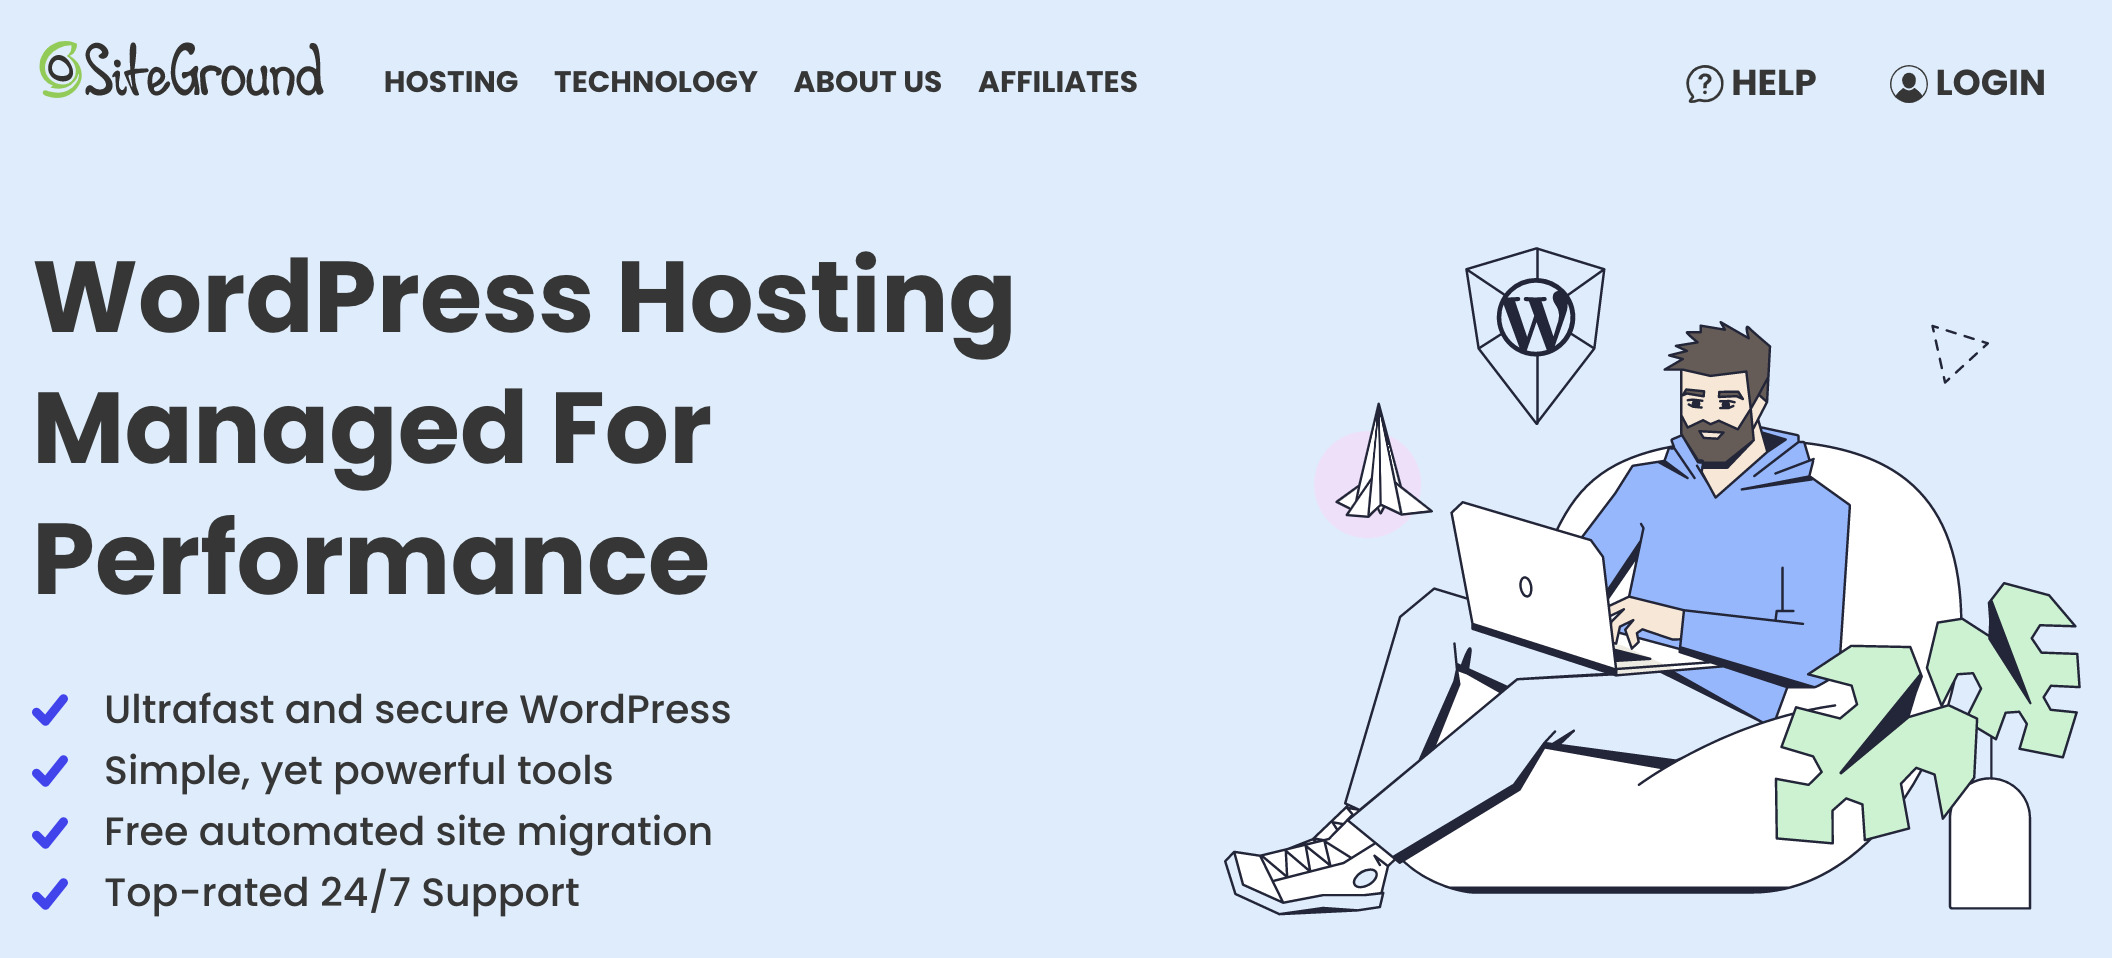 Siteground is the FASTEST Hosting for Wordpress & usually the BEST Choice